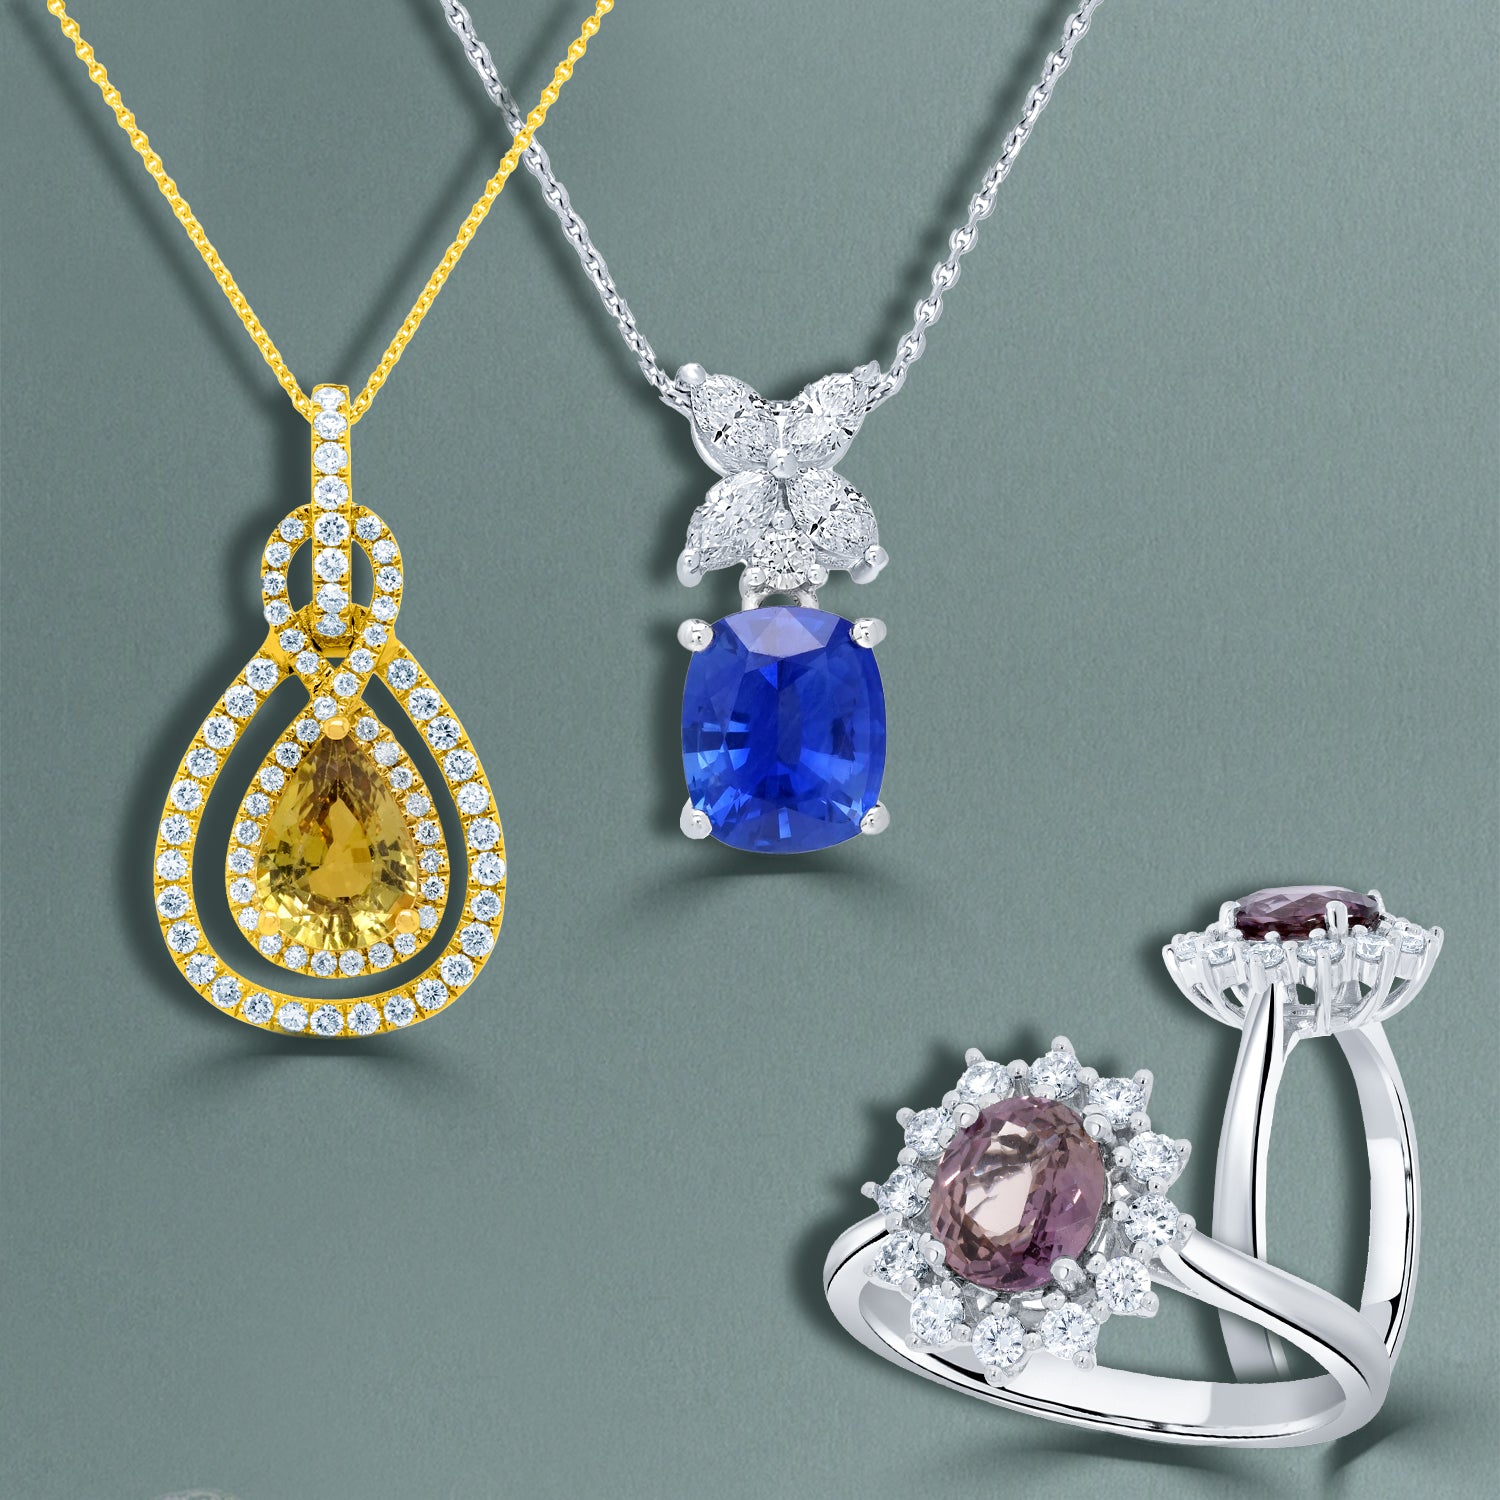 Sapphires - All you need to know before you buy